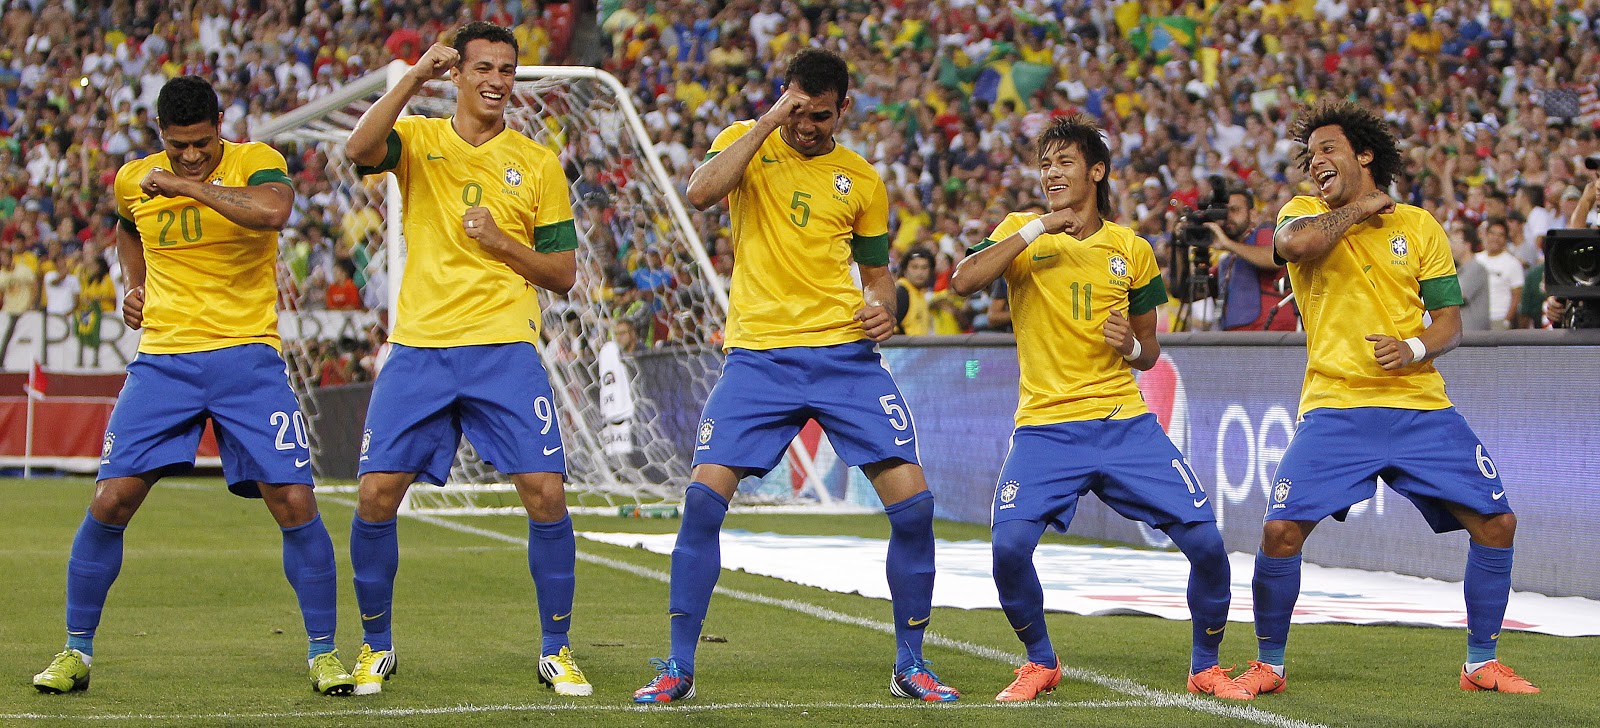 Will Brazil finally step up their game?